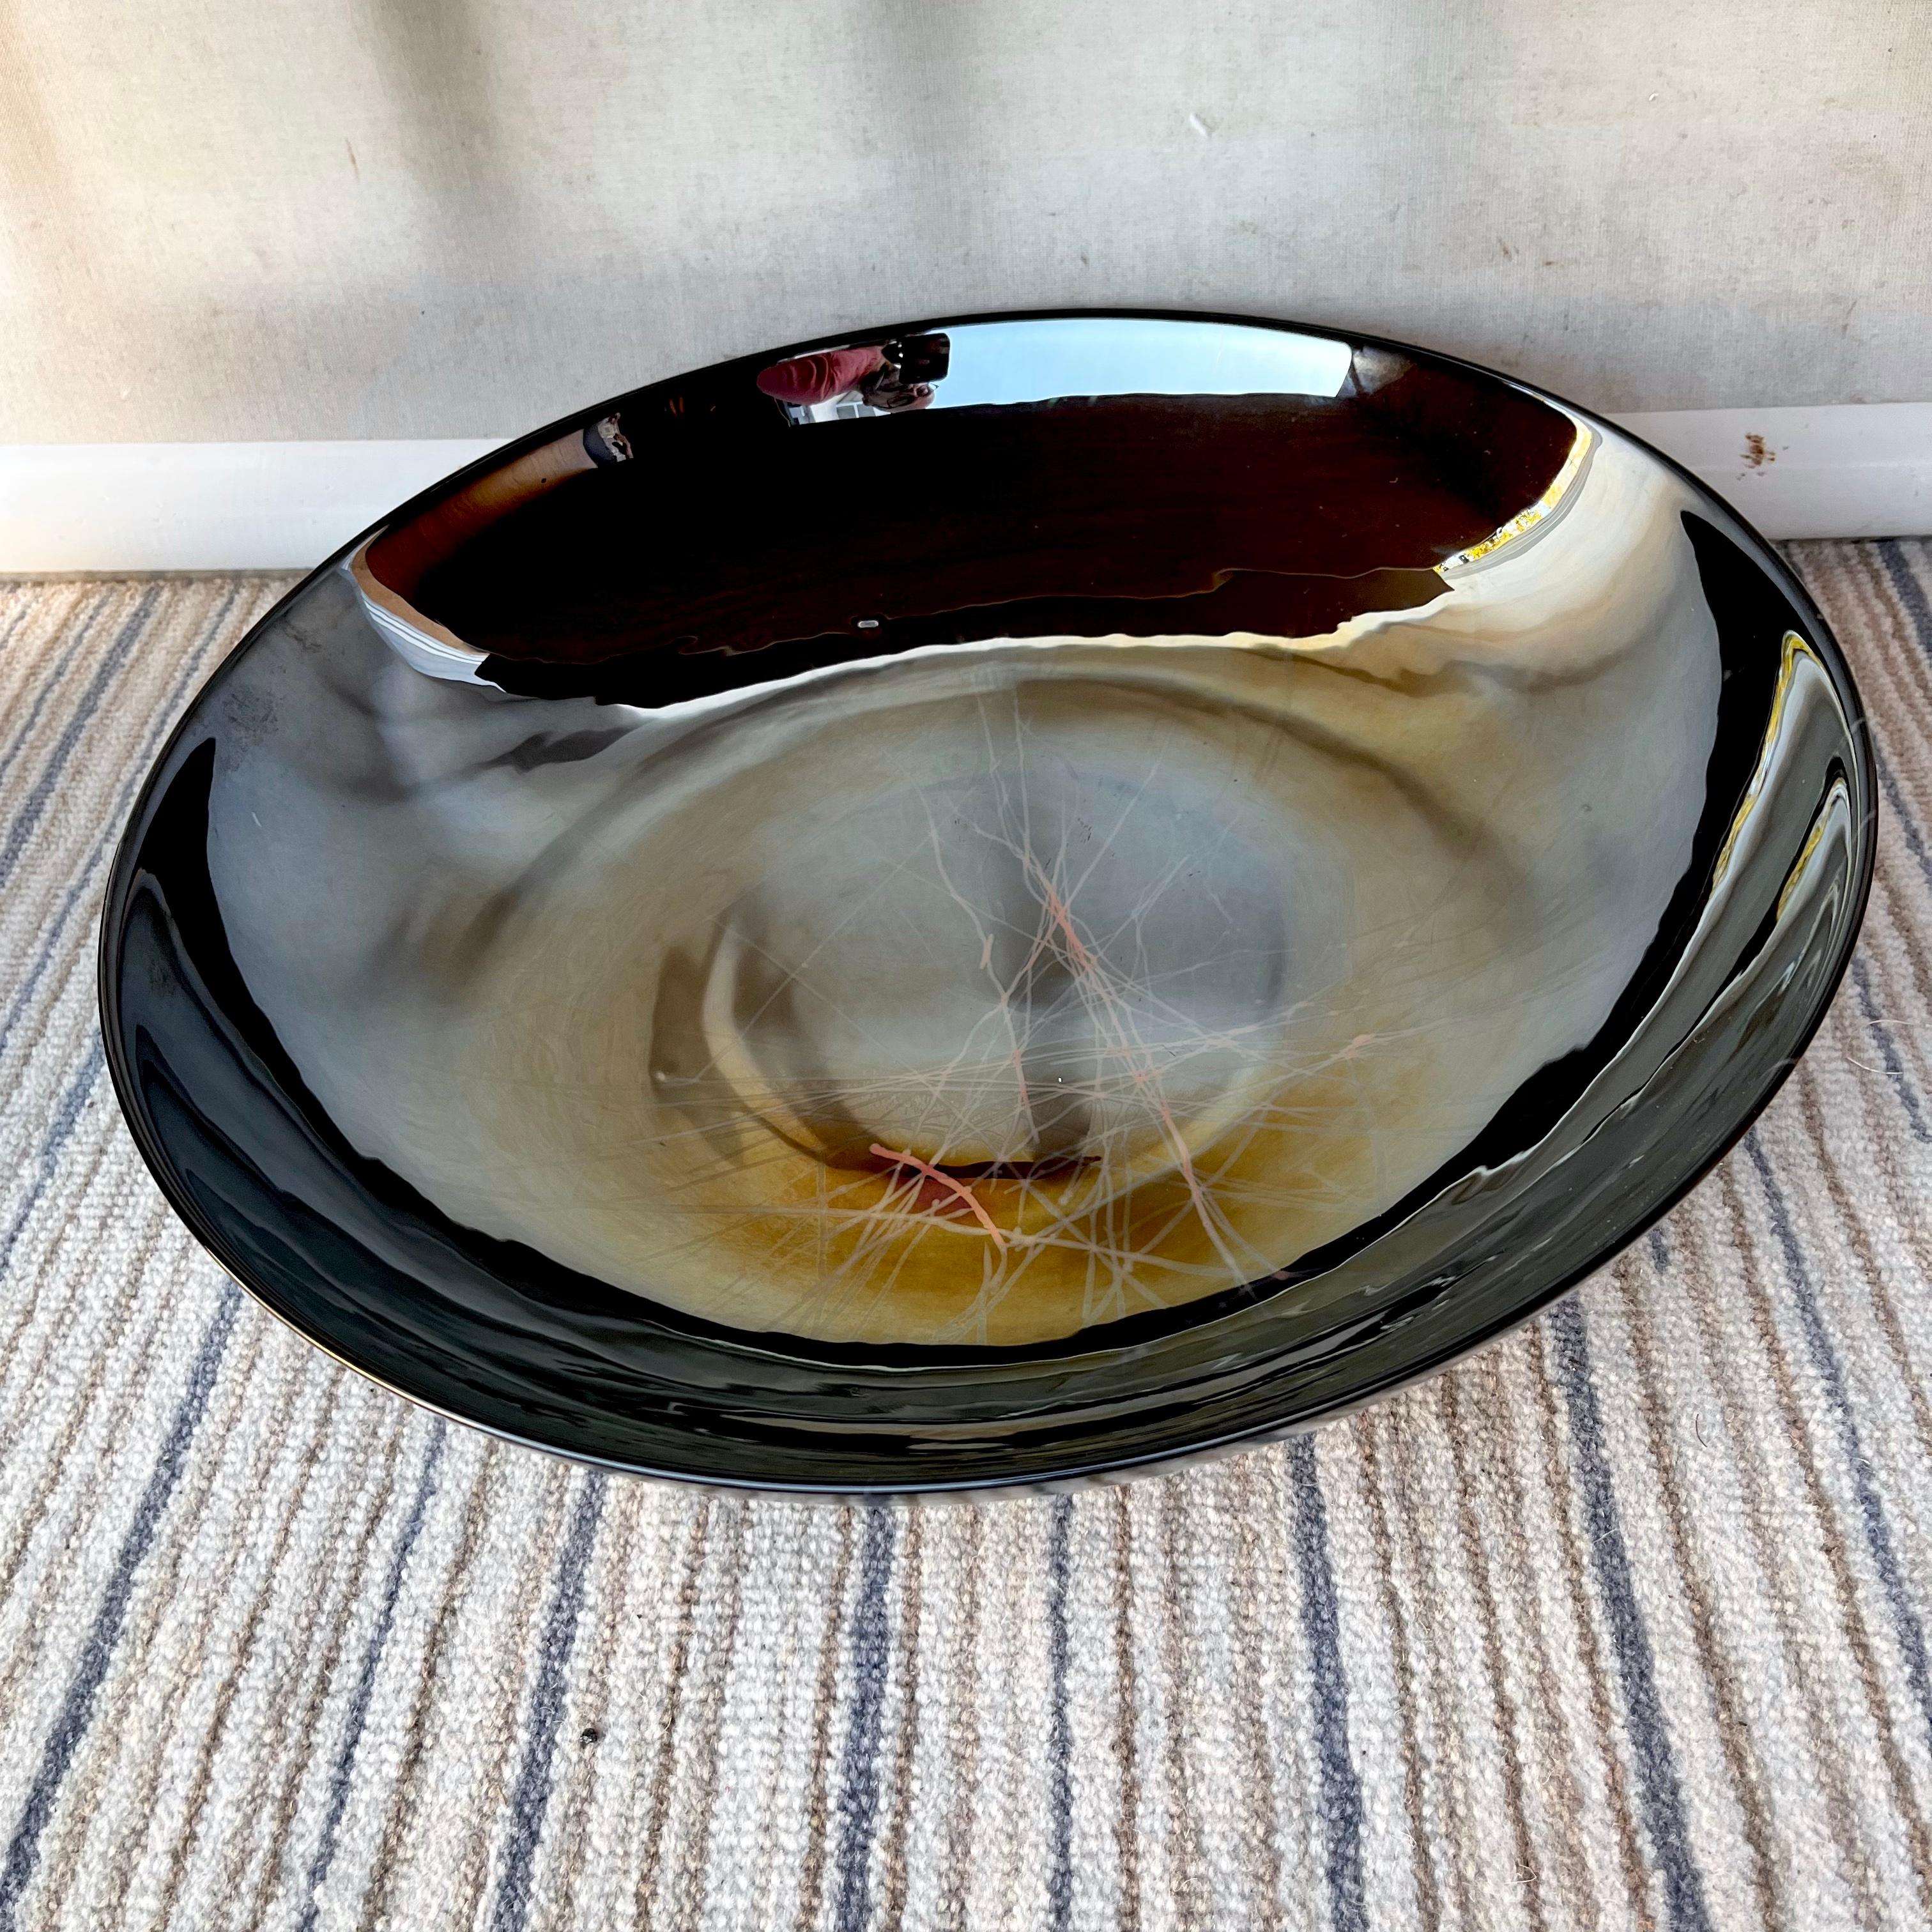 Large Contemporary Murano glass centerpiece decorative bowl by Yalos Casa Murano. Circa Early 2000s. 
Features a muted black exterior shell with a polished pearl like light reflecting opalescent glass interior surfaced in a dark pewter color,